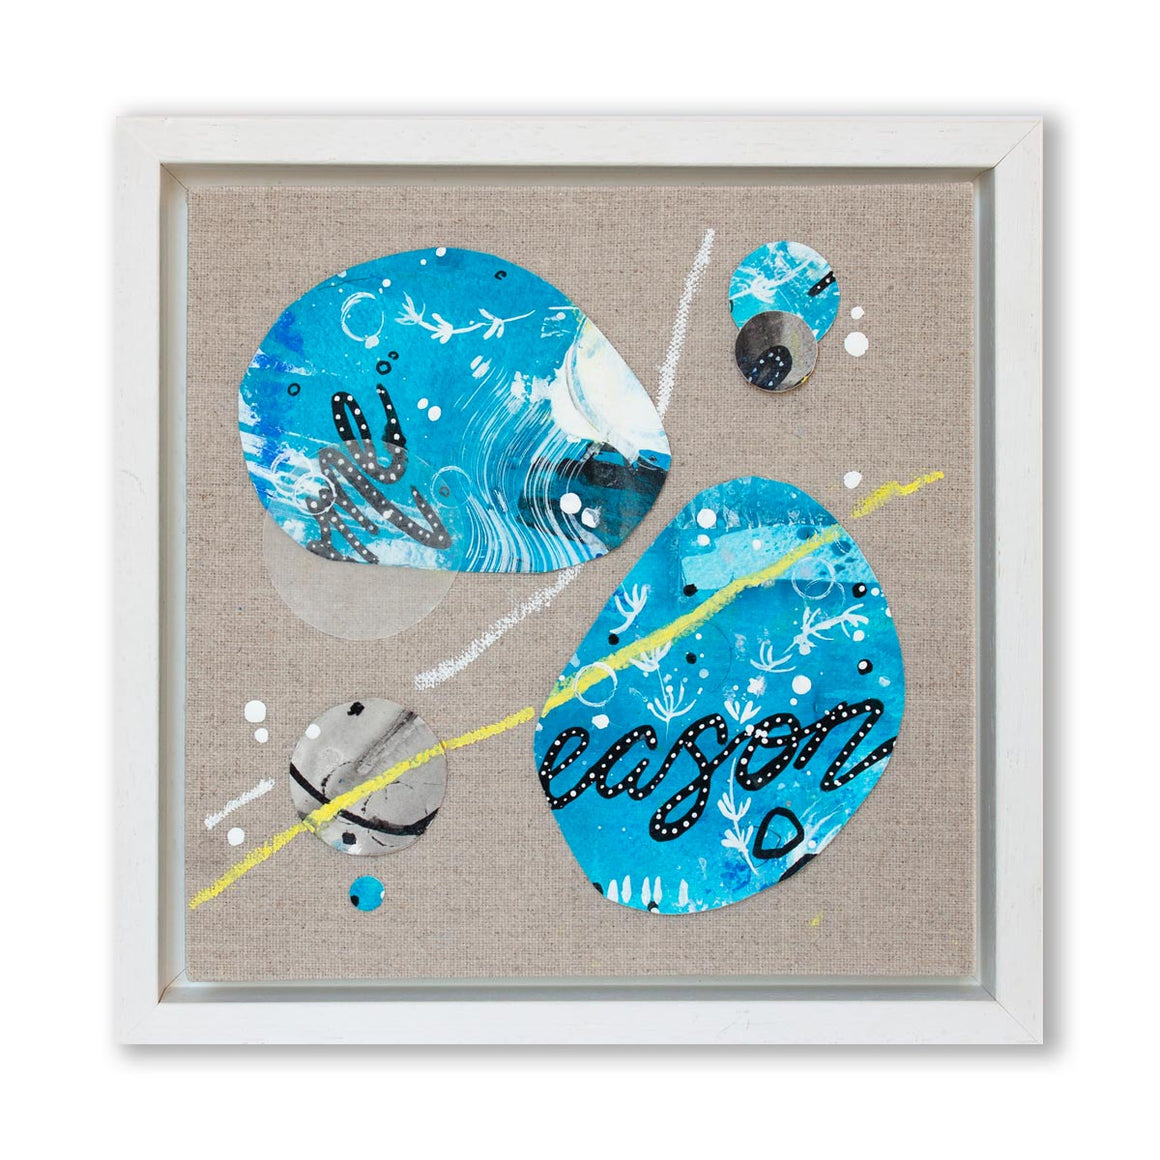 Finding our reason |  Framed Pebble Painting on 20cm sq Canvas